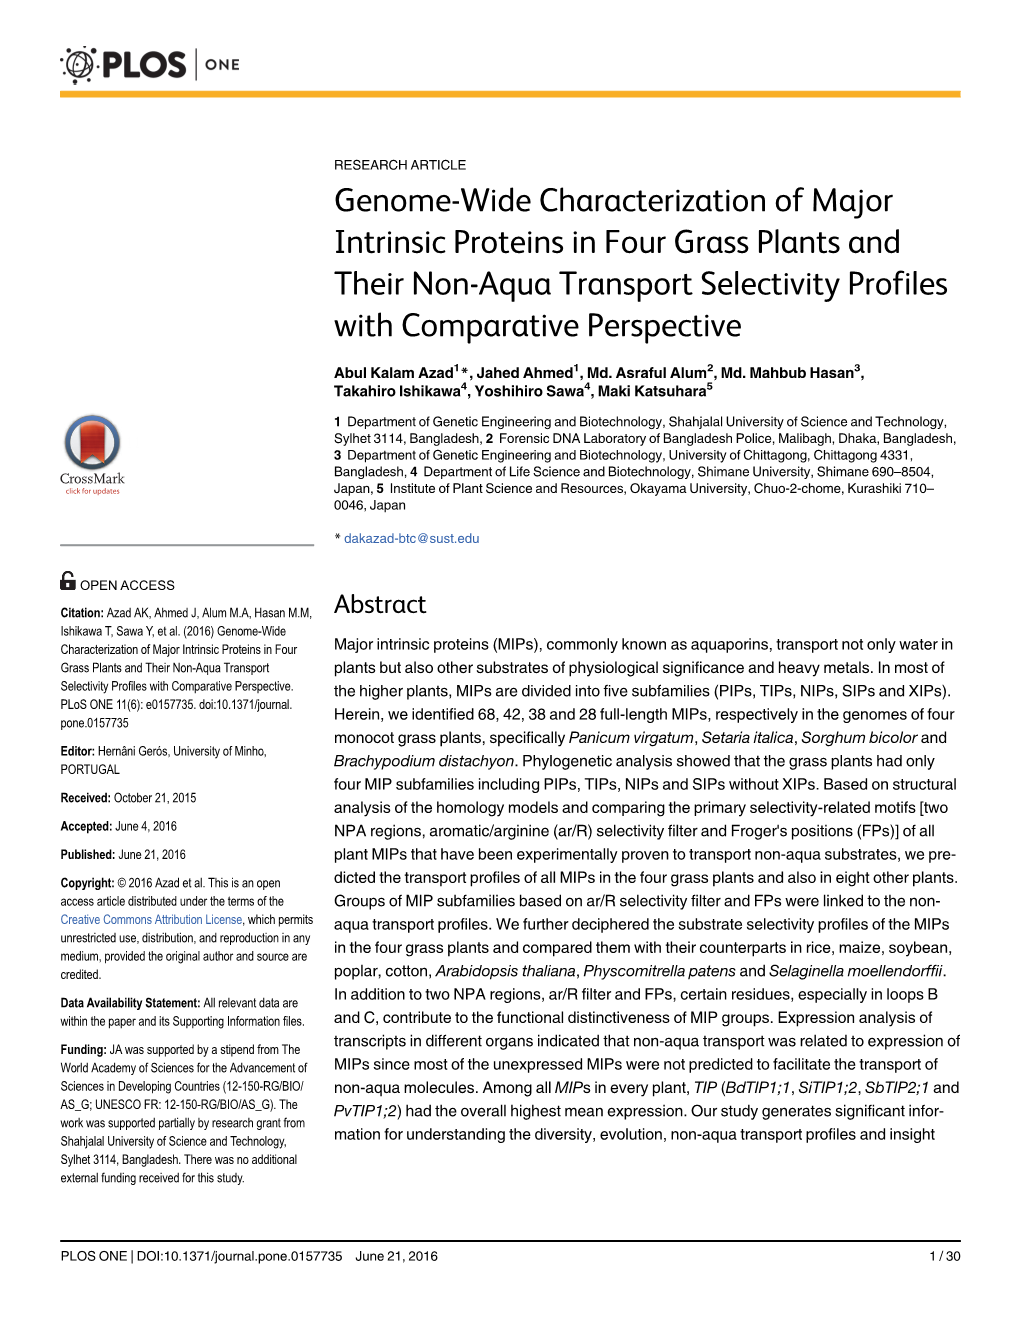 Genome-Wide Characterization of Major Intrinsic Proteins in Four Grass Plants and Their Non-Aqua Transport Selectivity Profiles with Comparative Perspective